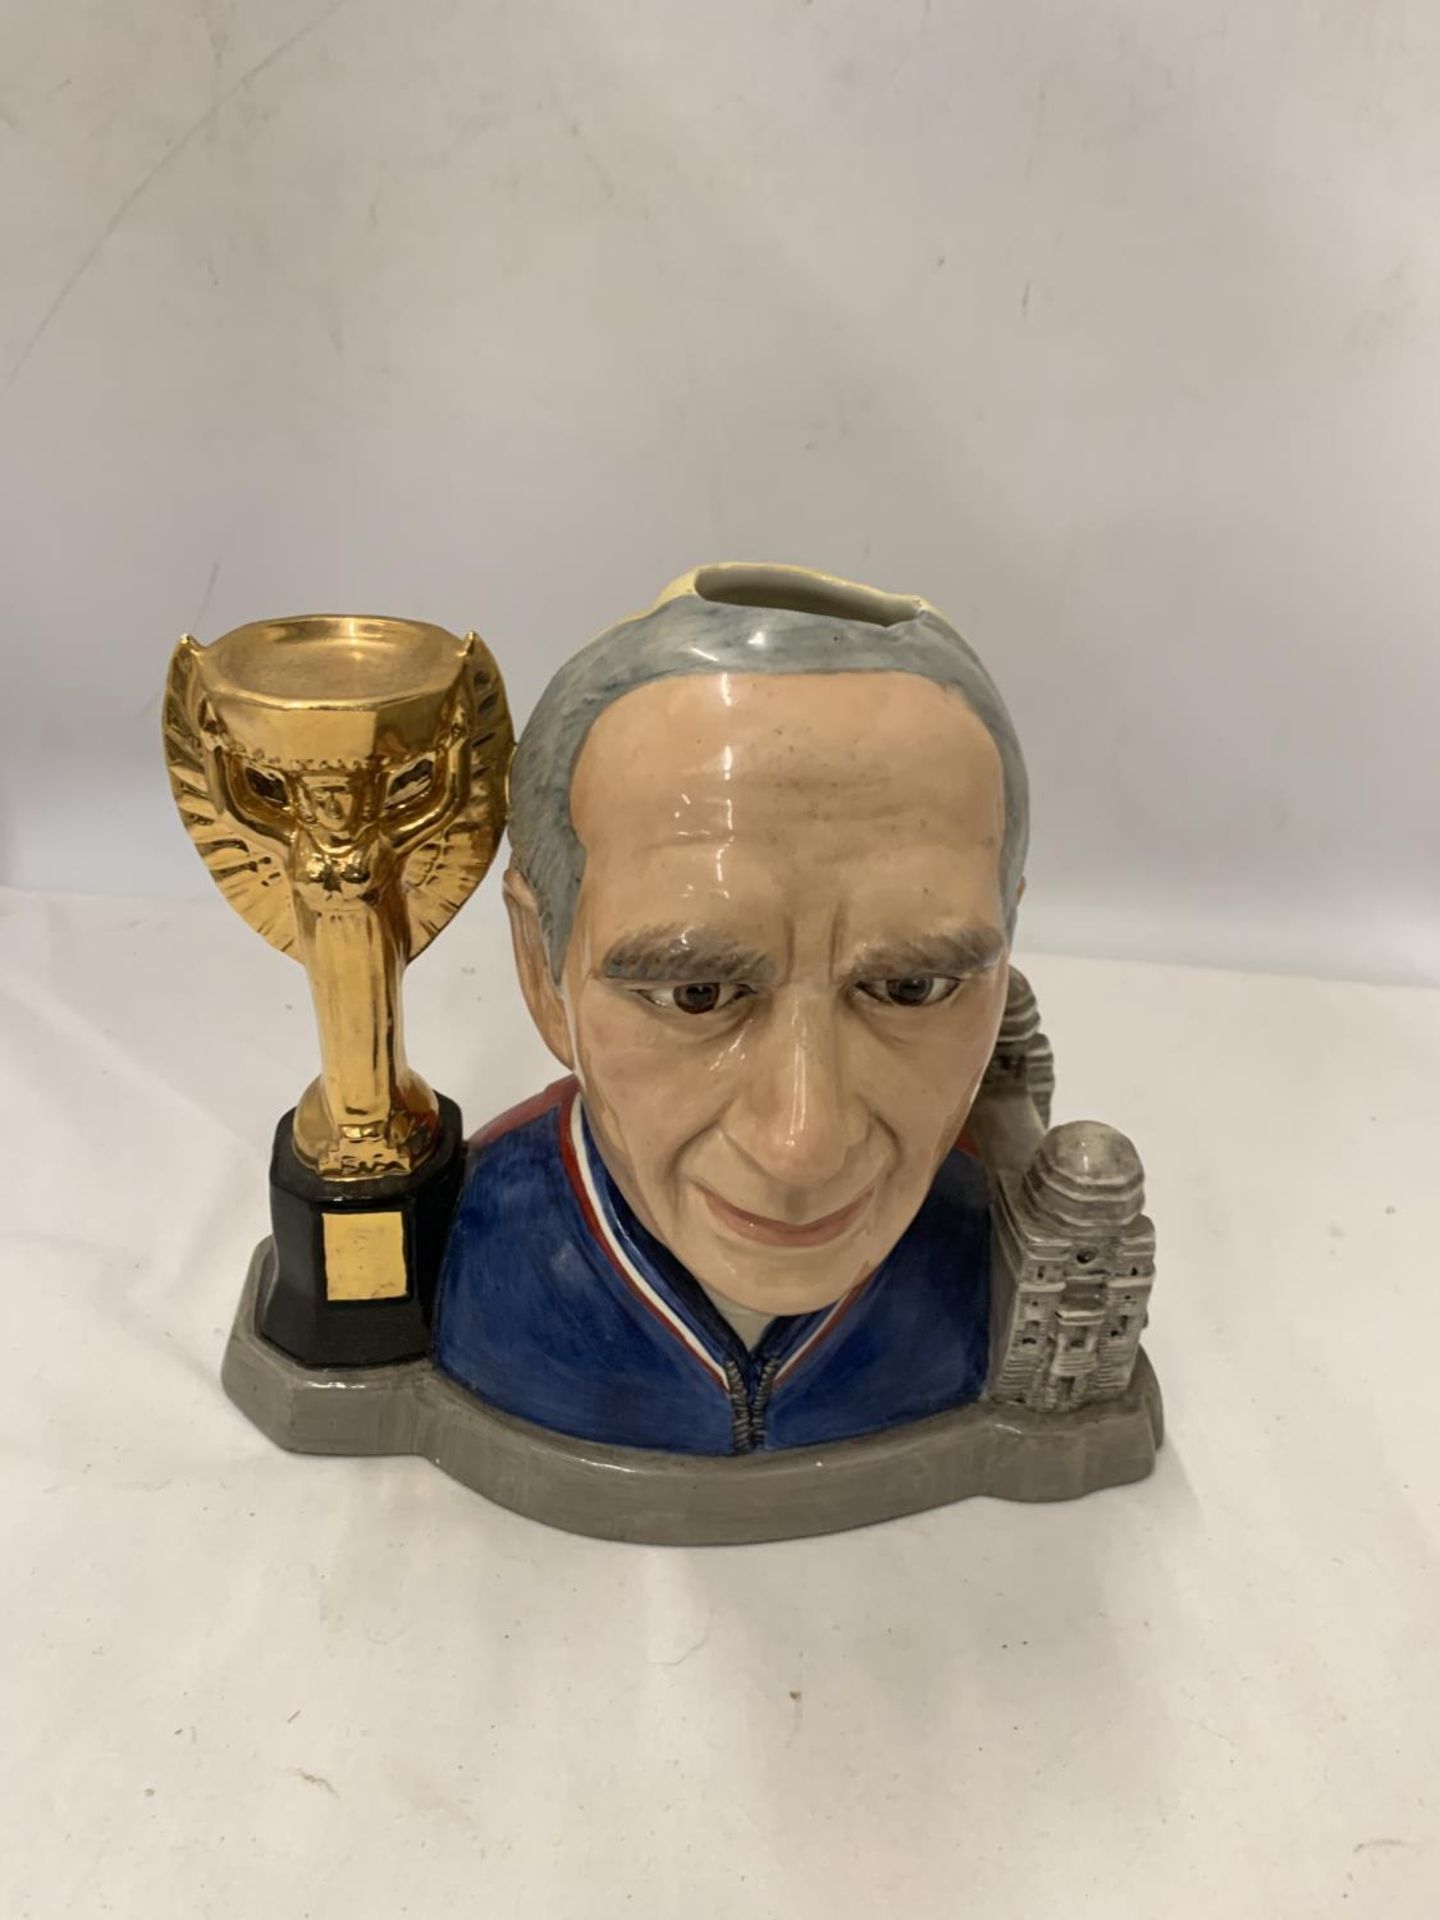 A TWIN TOWERS, WEMBLEY, BOBBY MOORE AND ALF RAMSEY, MINT CONDITION TOBY JUG - Image 2 of 3